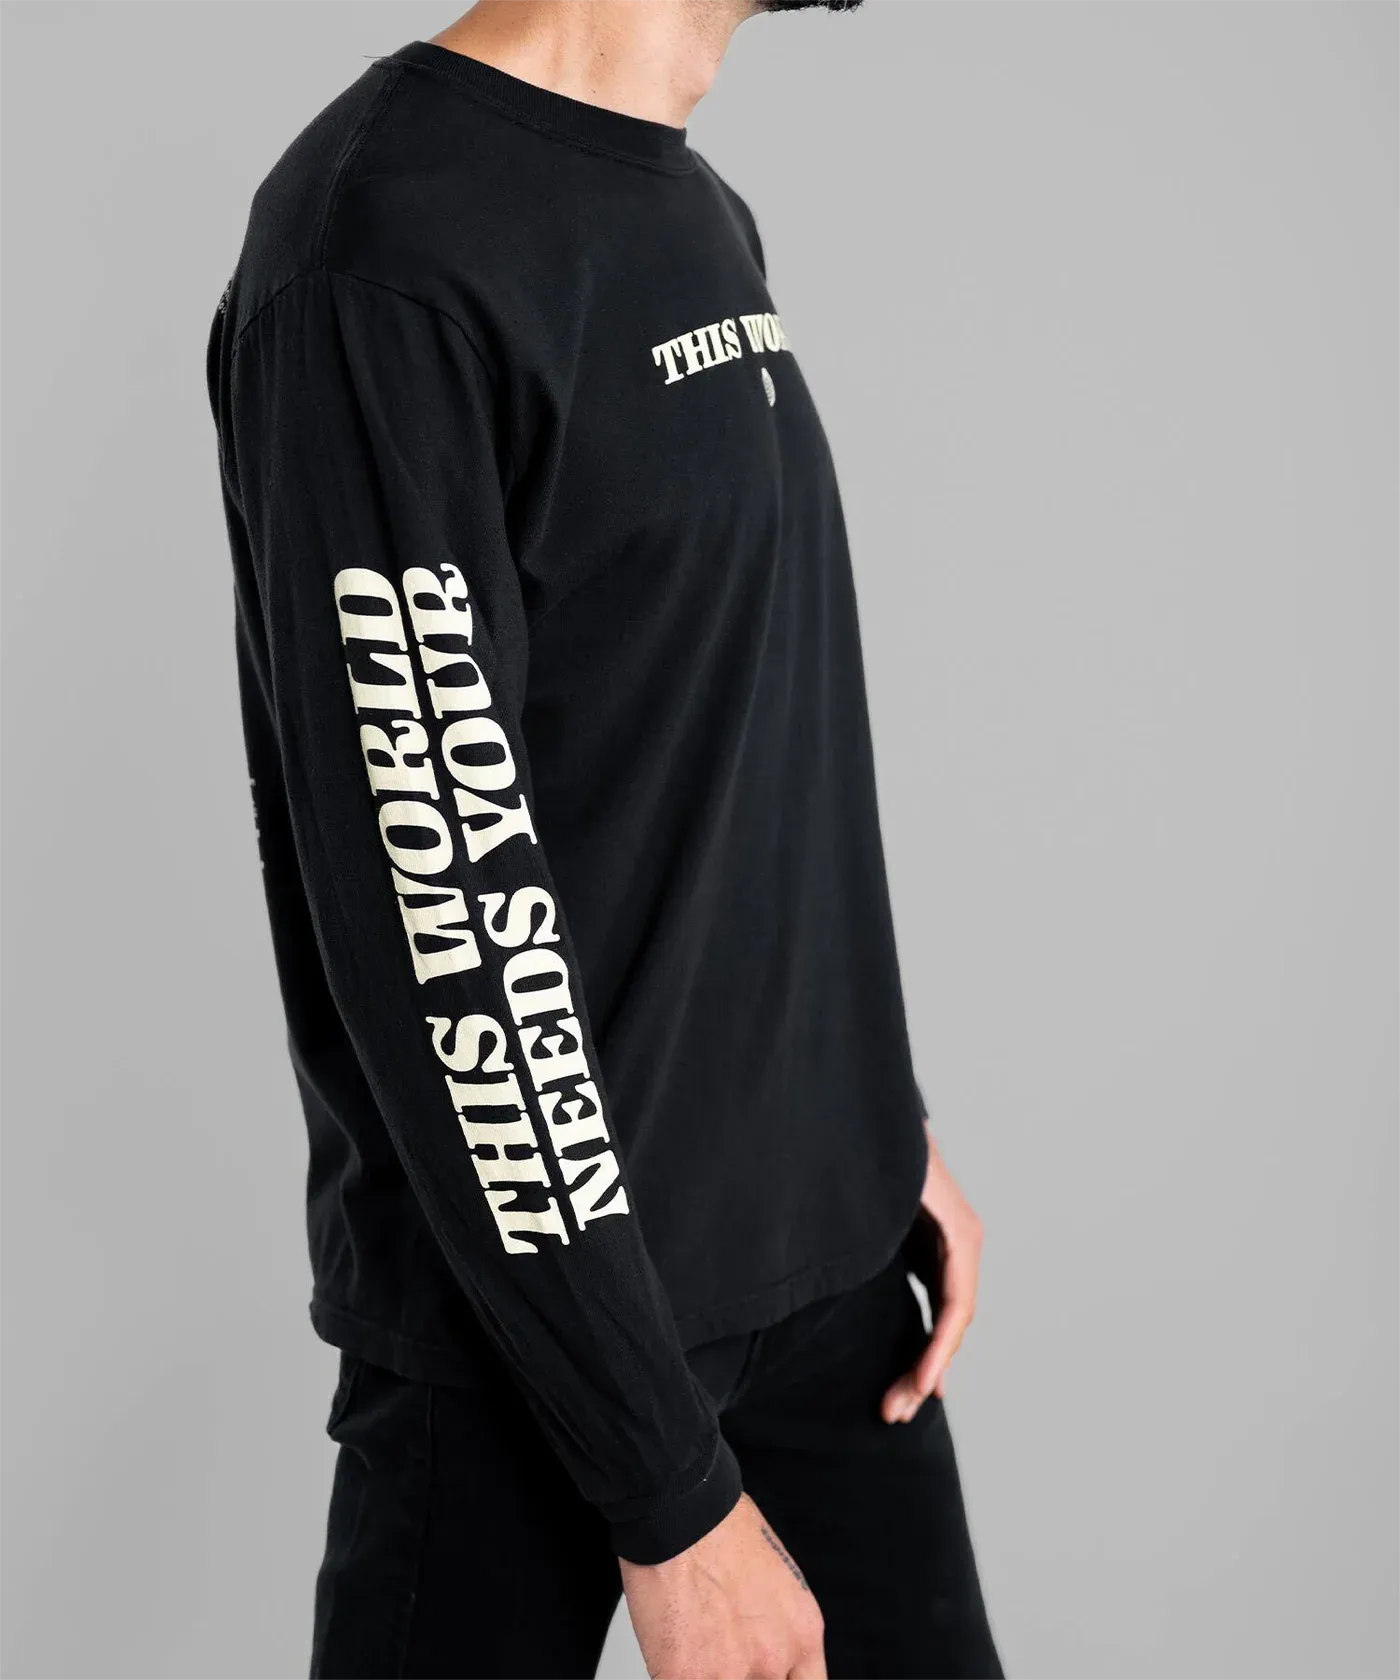 long sleeve shirts with writing on the sleeves images